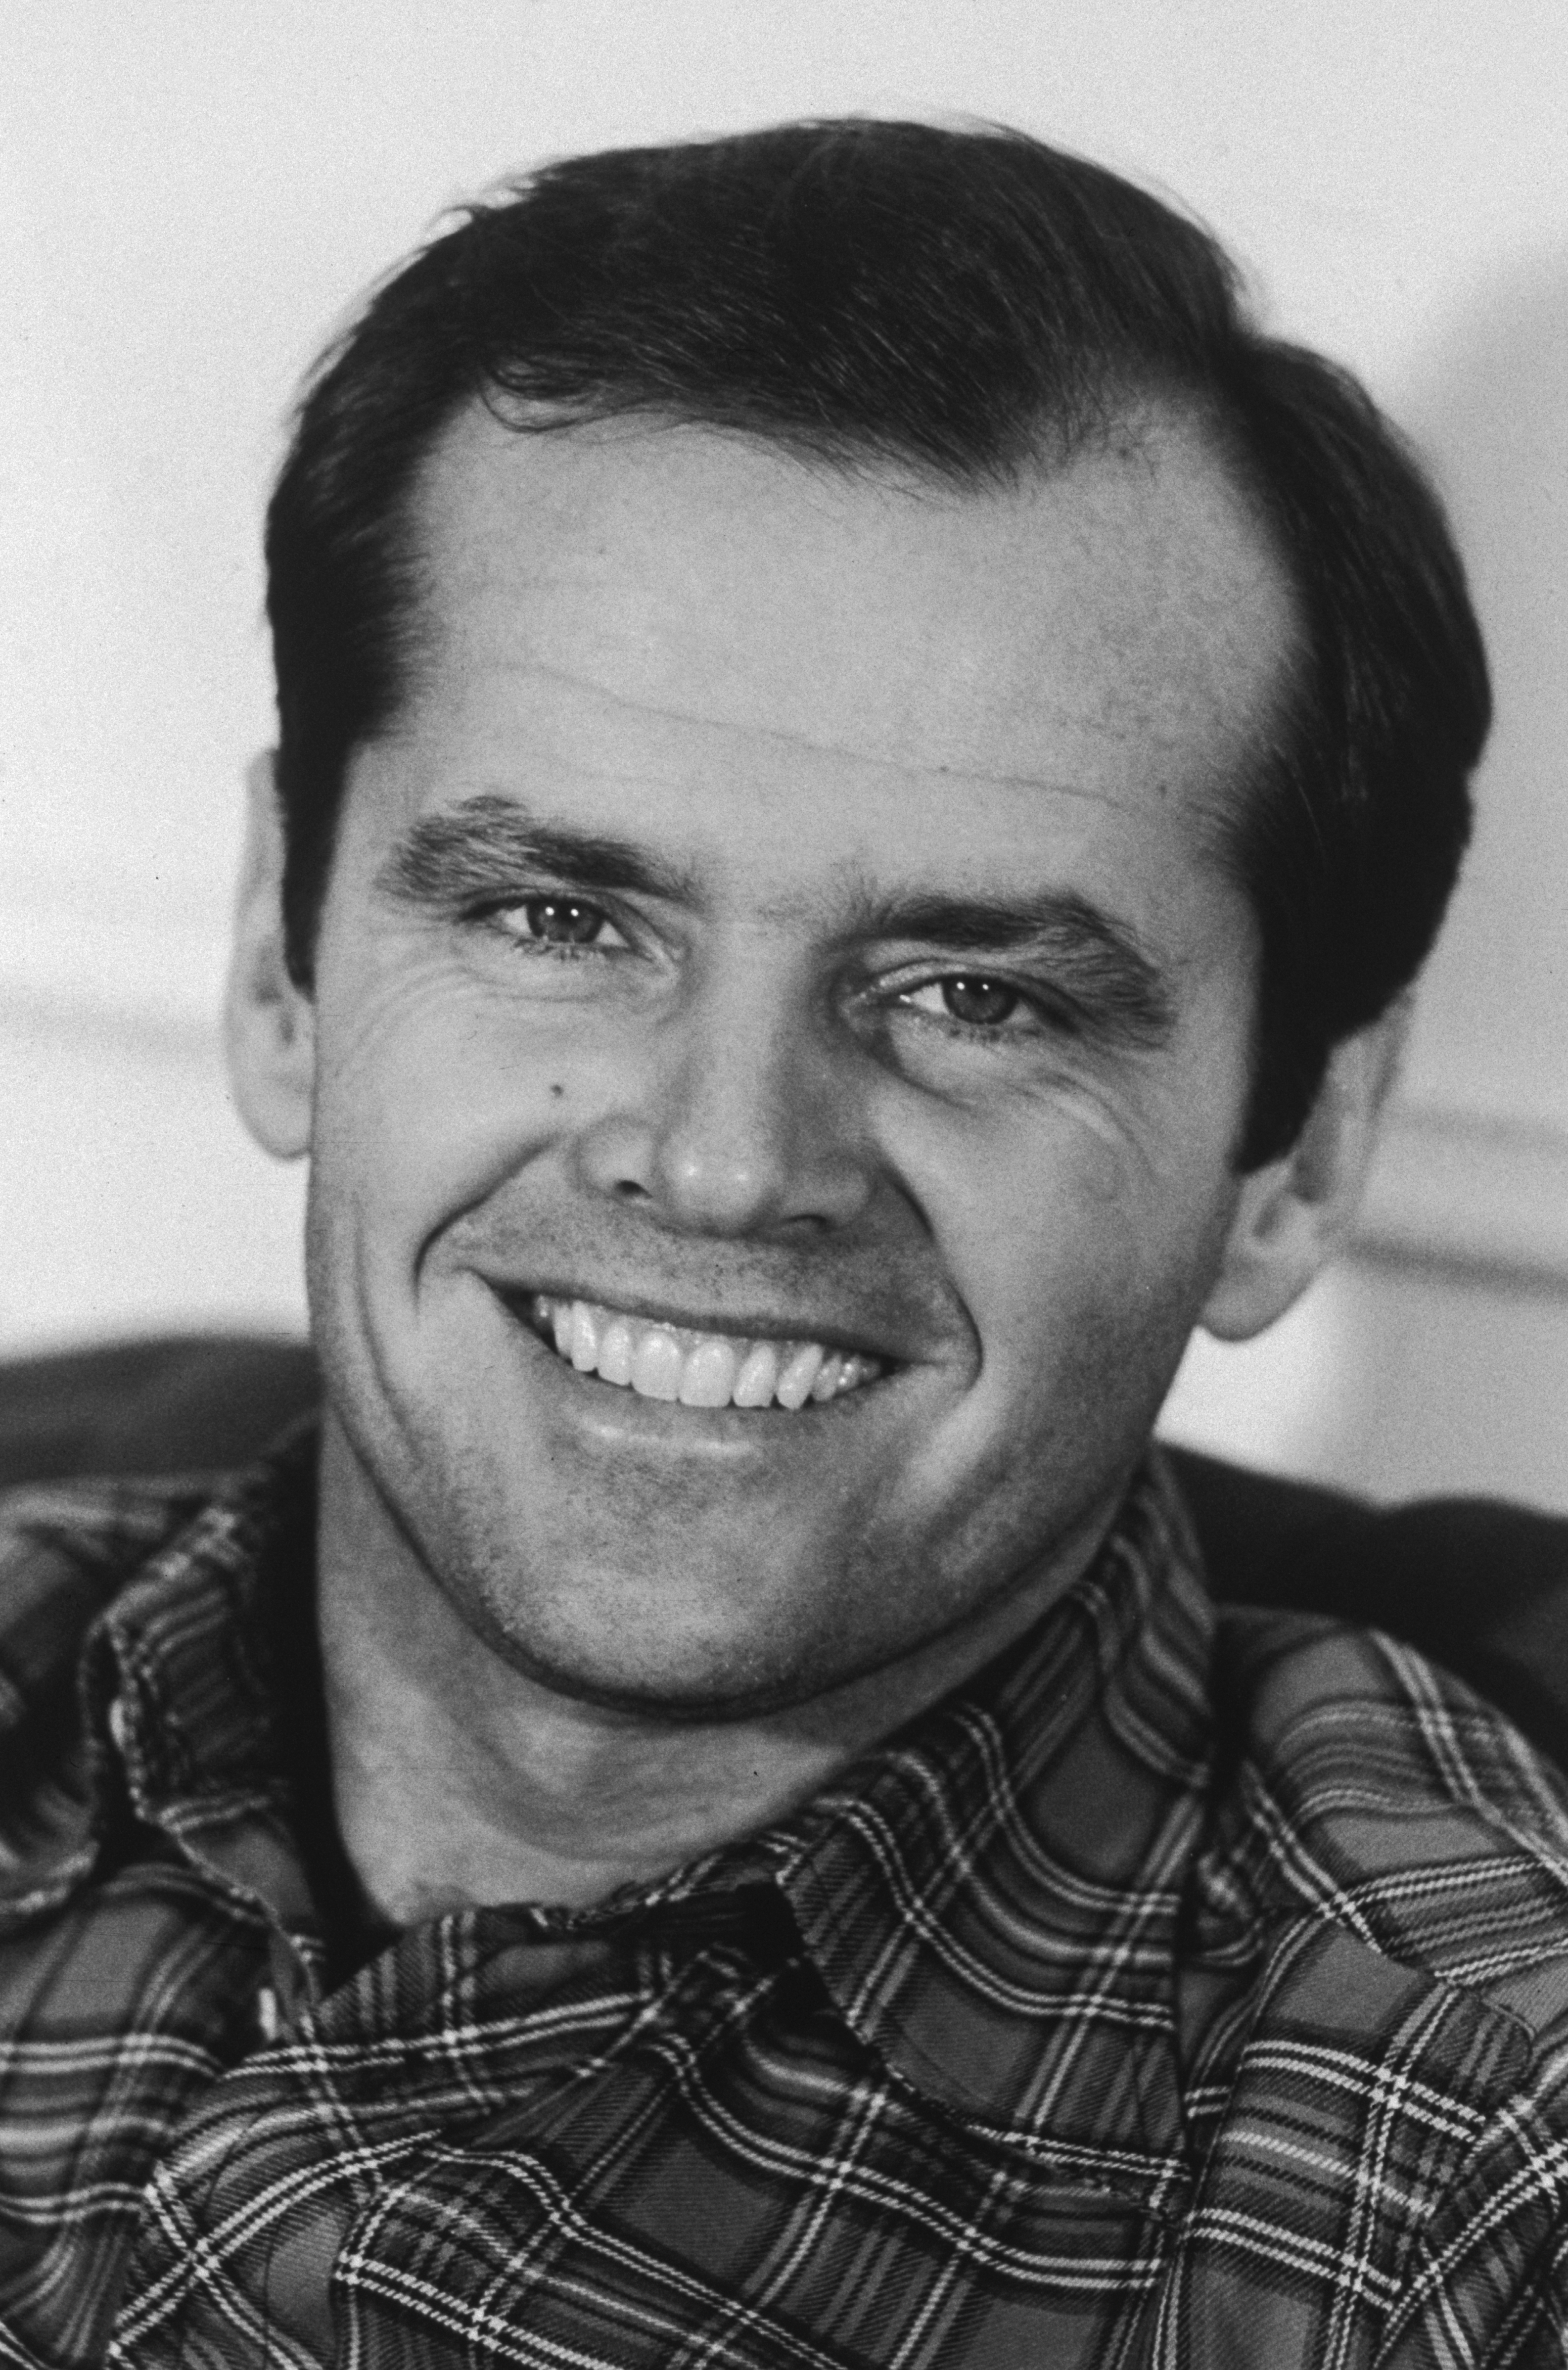 Jack Nicholson photographed in 1974 | Source: Getty Images